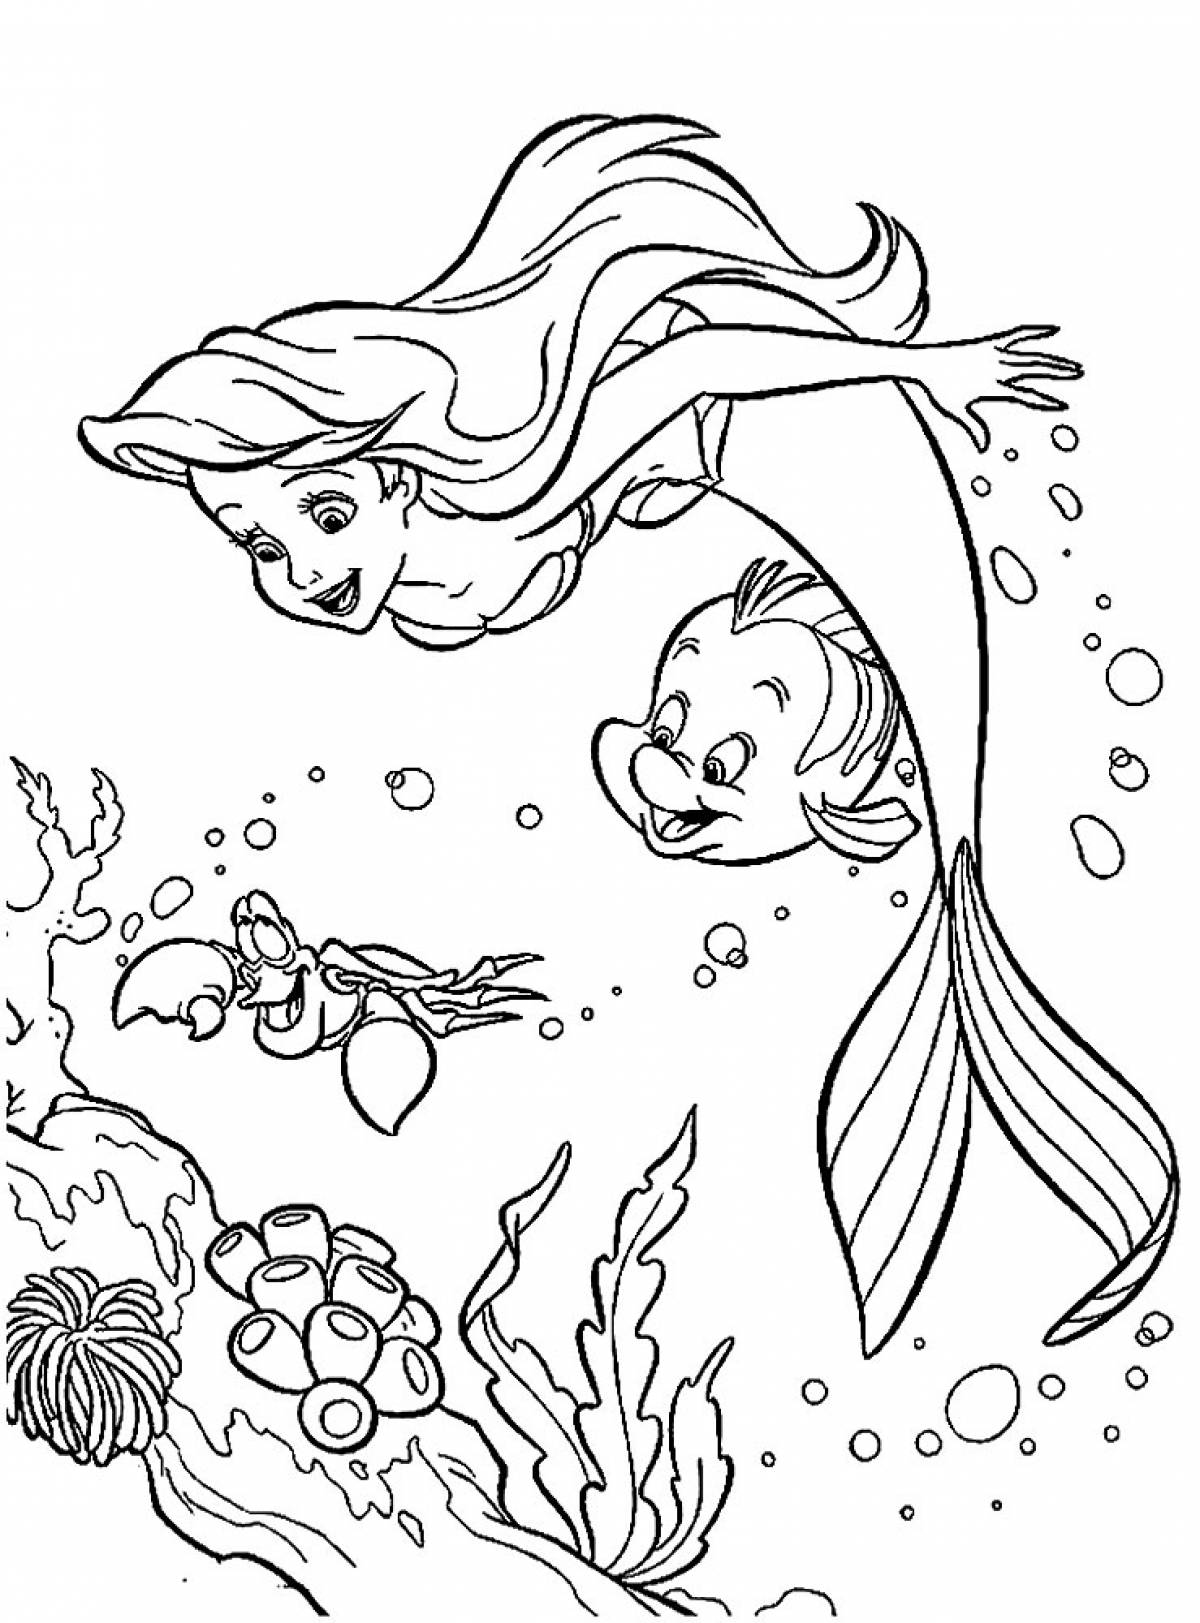 Ariel and Flounder coloring